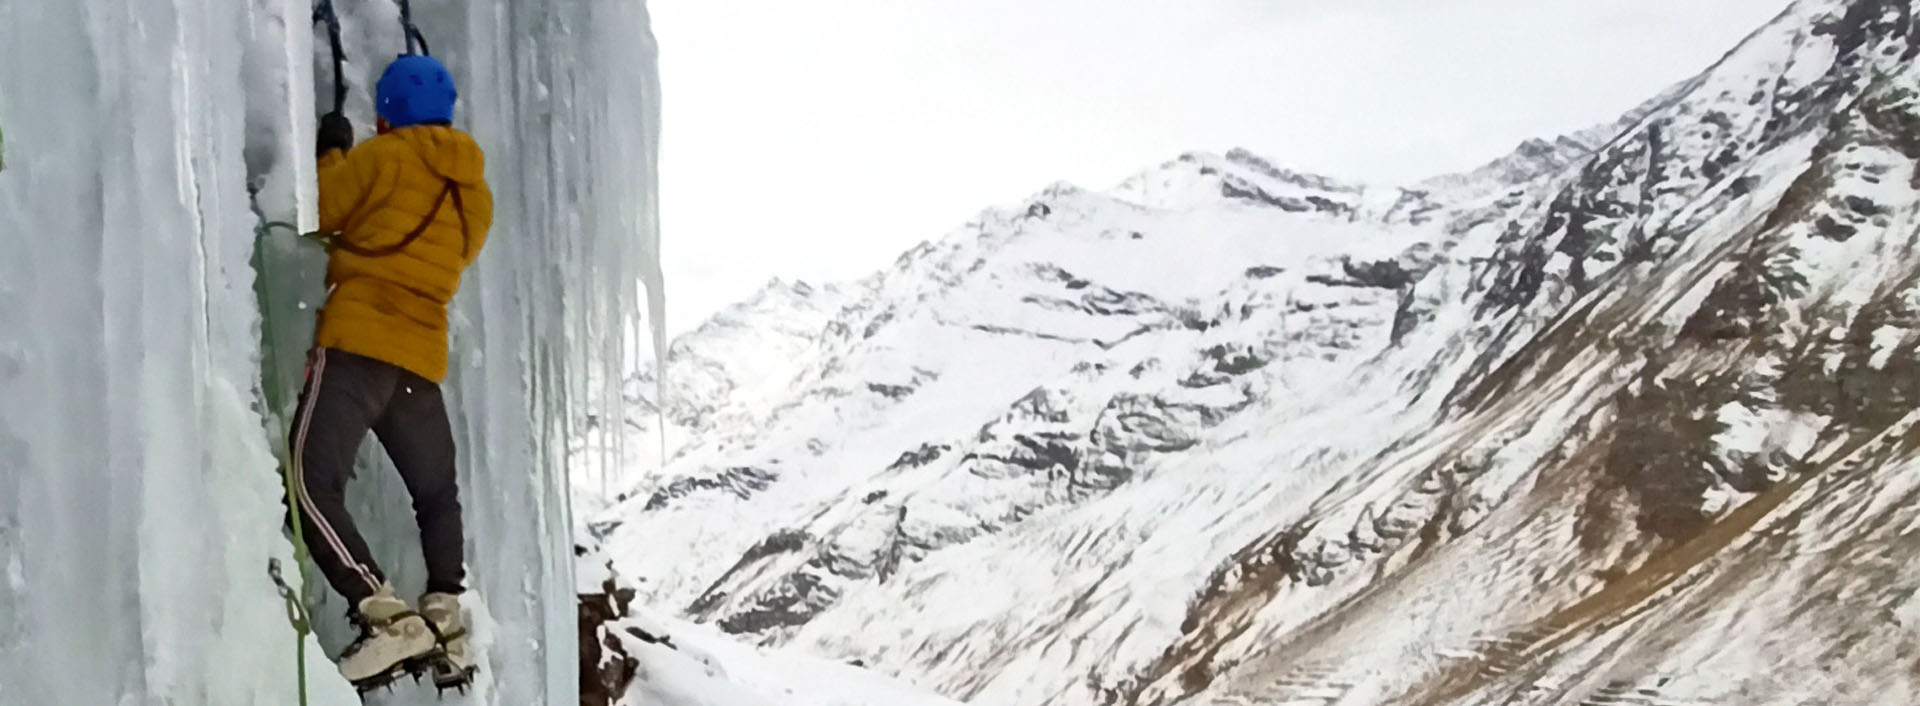 Umesh Raina climbs an ice wall while wearing mountaineering boots equipped with an ice axe and crampons in bara shigri